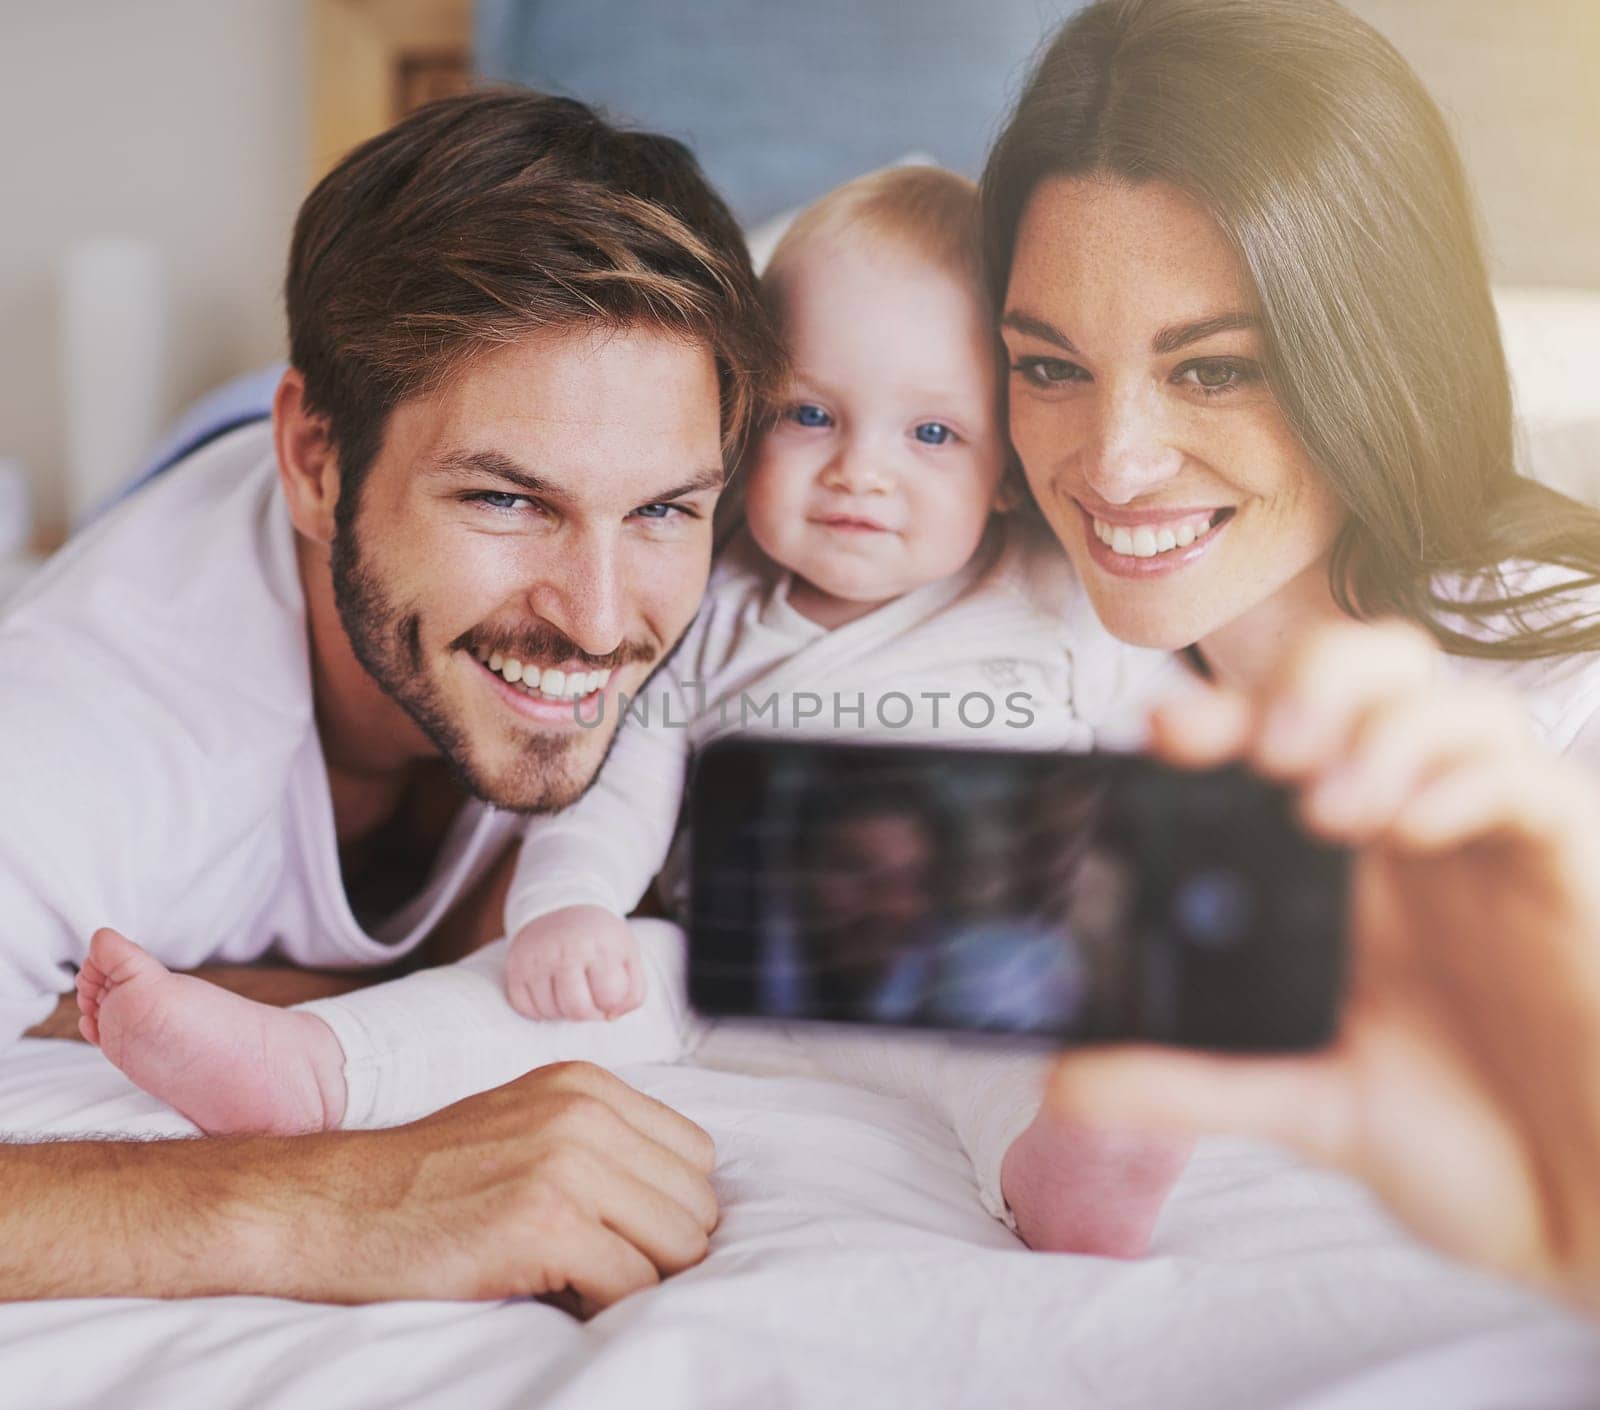 Happy family, parents and selfie of baby on bed in home for love, care and quality time together. Mother, father and newborn child smile for photograph, fun memory and happiness of bonding in bedroom by YuriArcurs